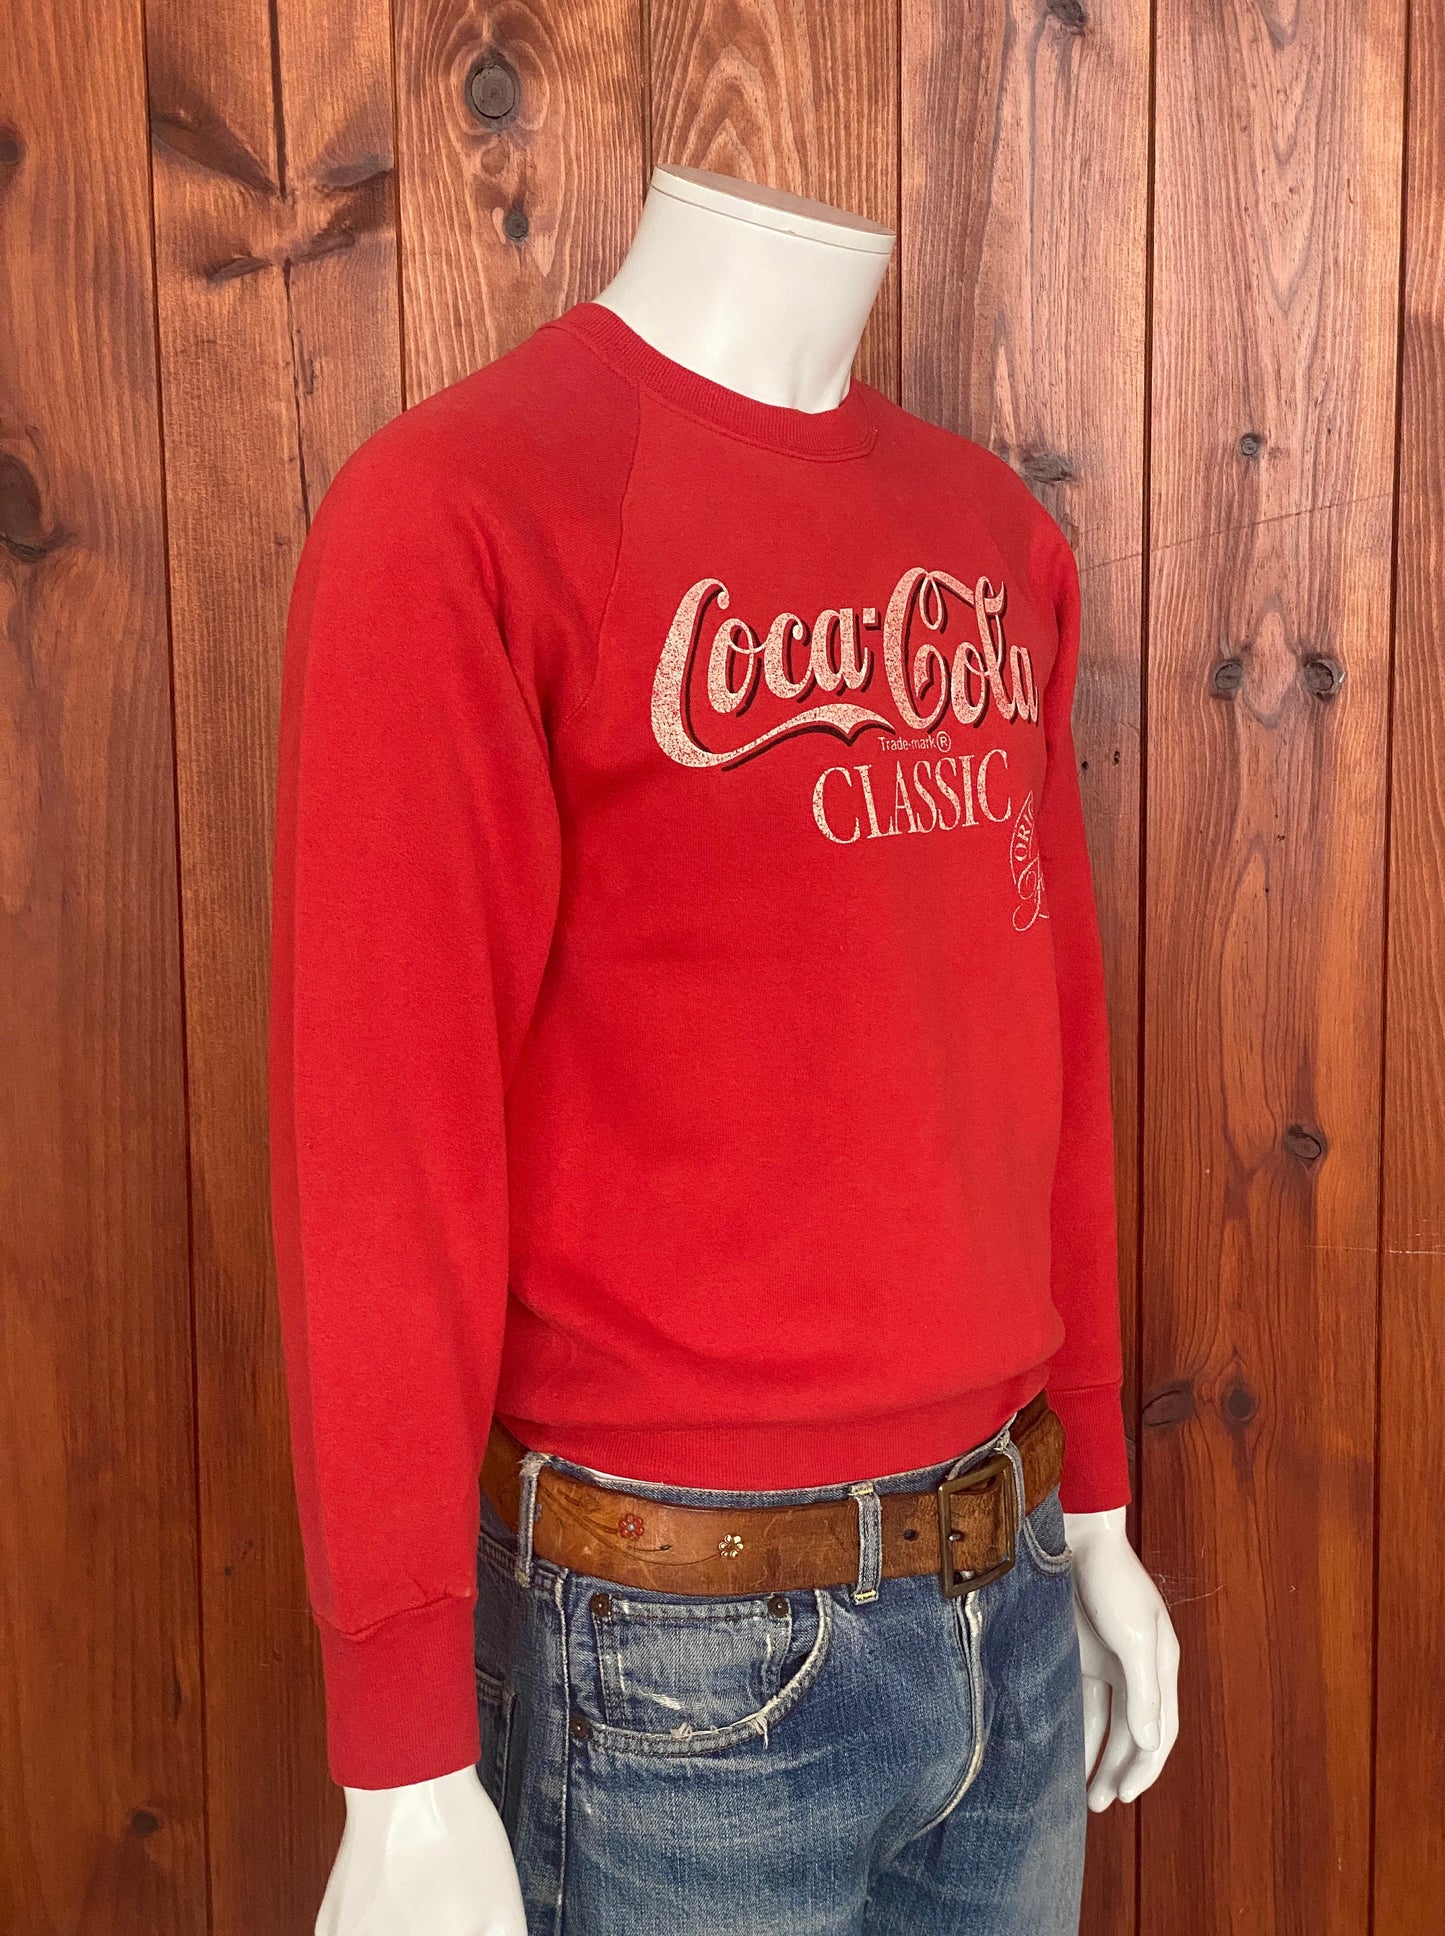 Size: M. Made In USA Fruit of the loom Coca cola 80s vintage sweatshirt